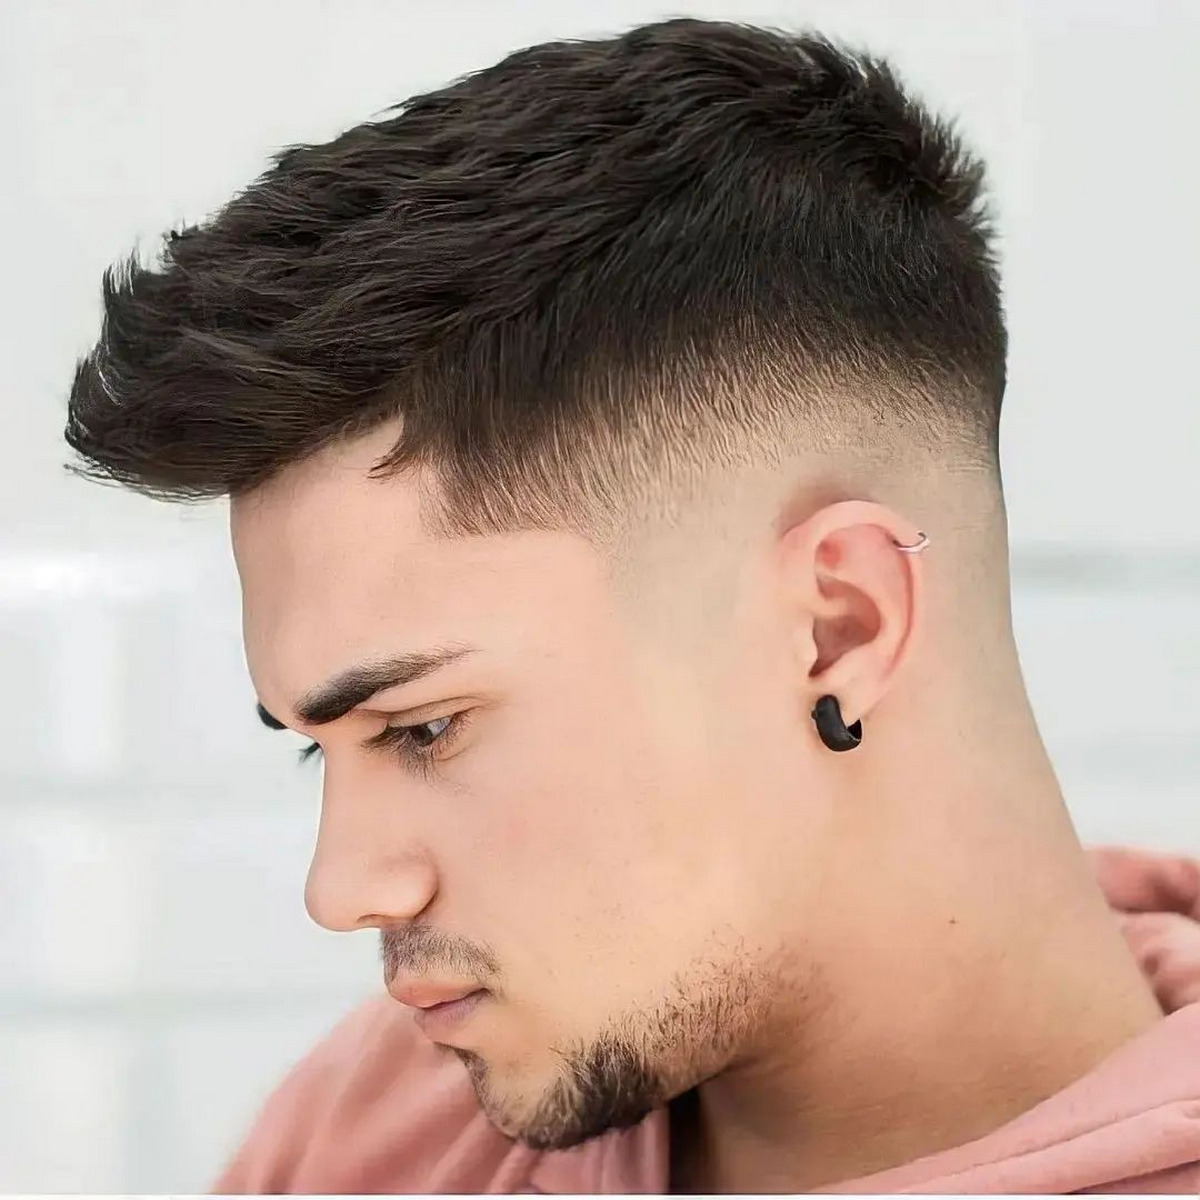 Man with mid-fade hair